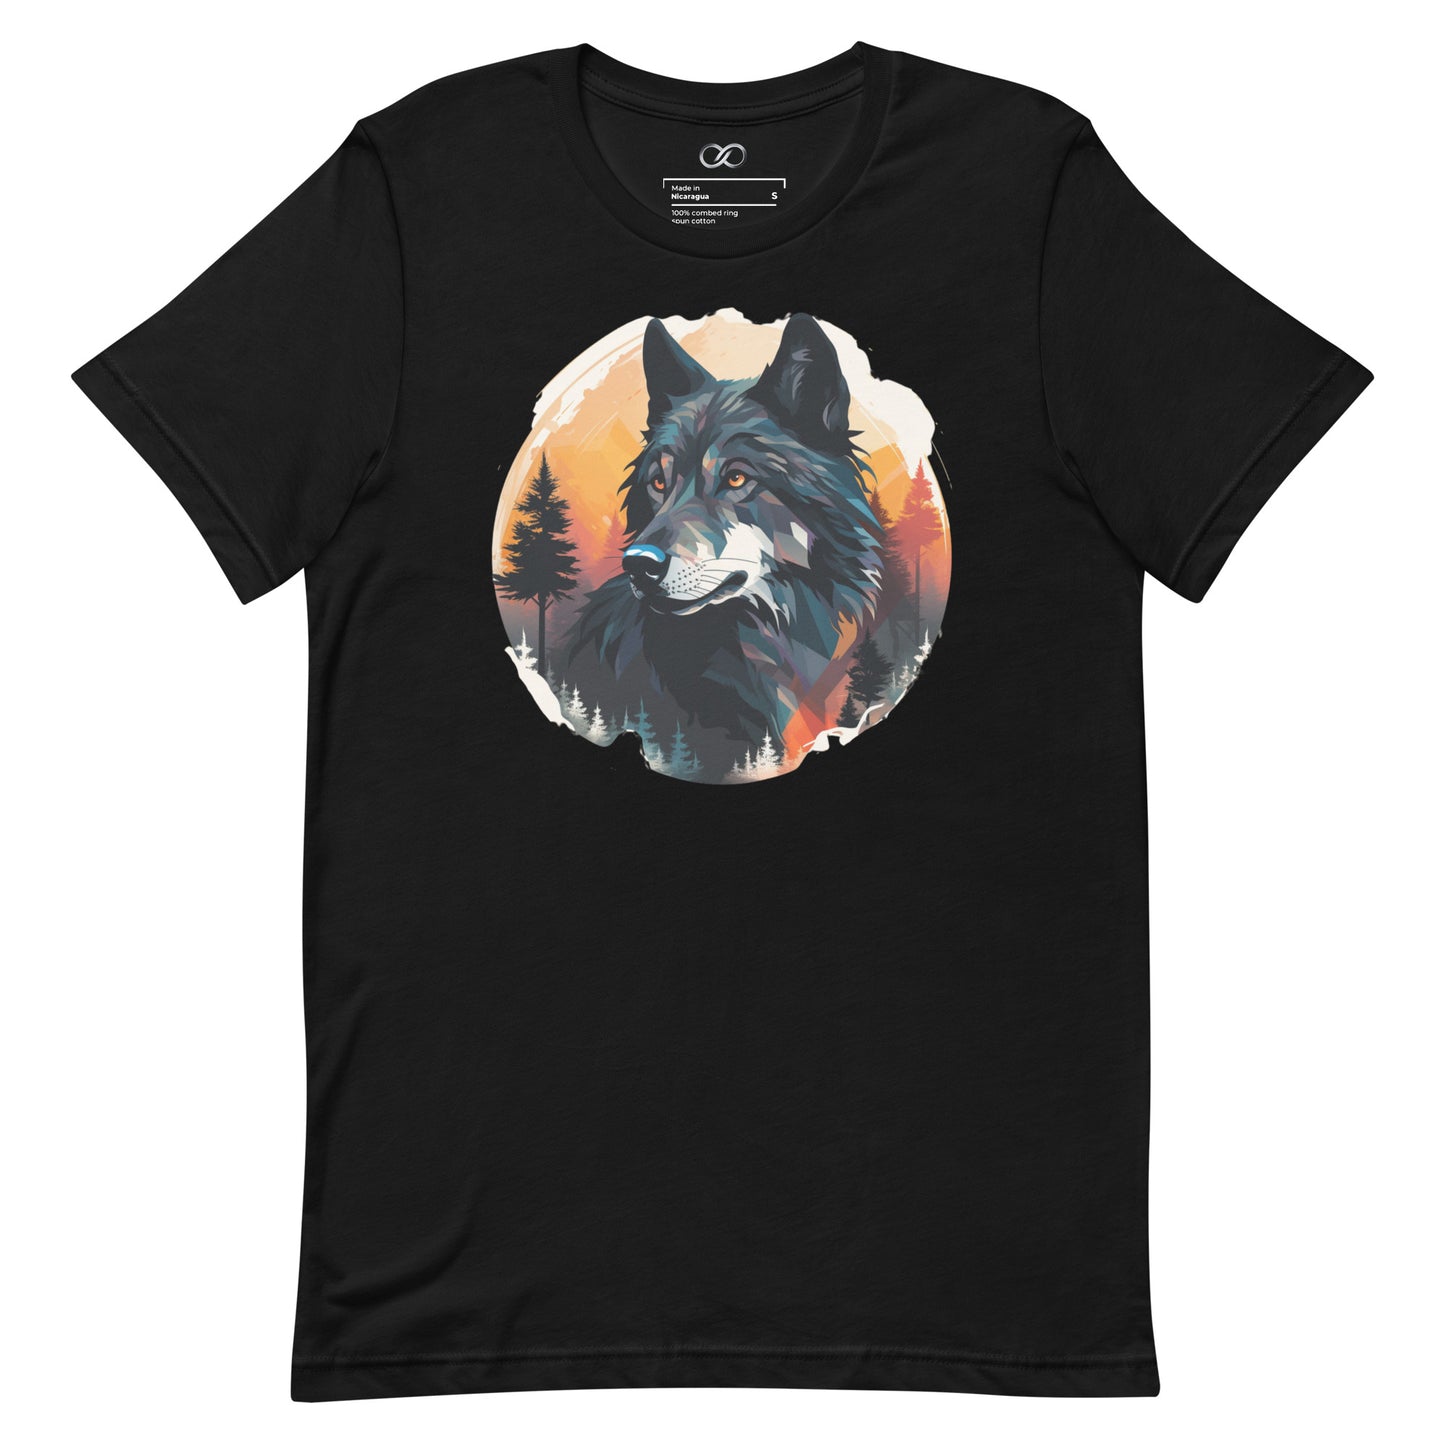 Black t-shirt with a central circular graphic depicting a detailed illustration of a wolf's face set against a backdrop of pine trees and sunset hues. The wolf is rendered in shades of blue and black with touches of white, conveying a majestic and wild essence.